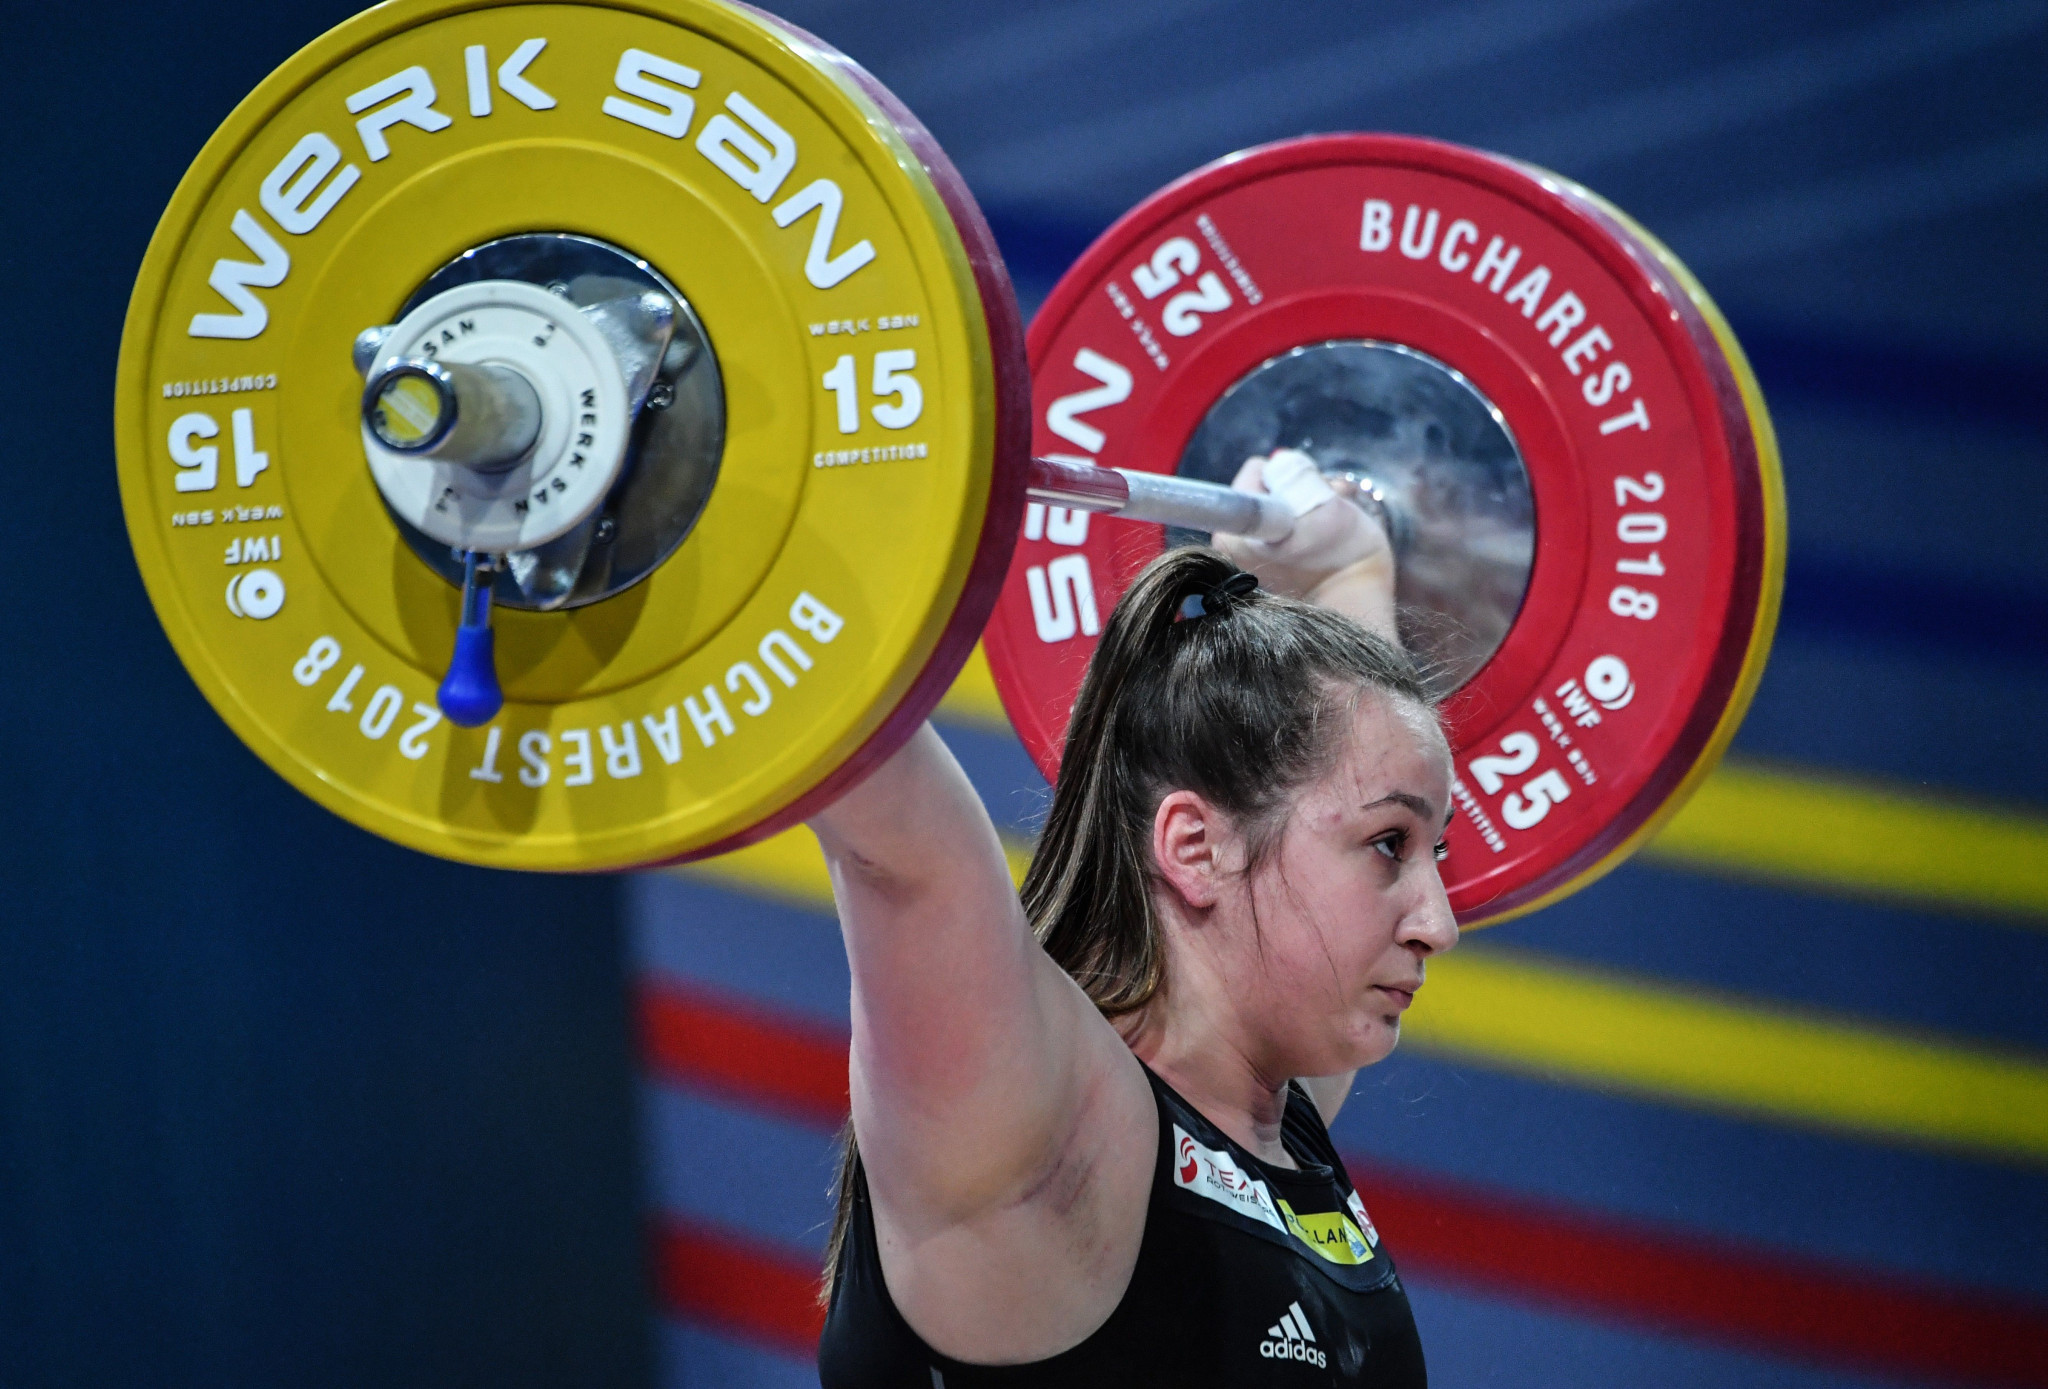 Sarah Fischer took gold at the European Weightlifting Championships ©Getty Images